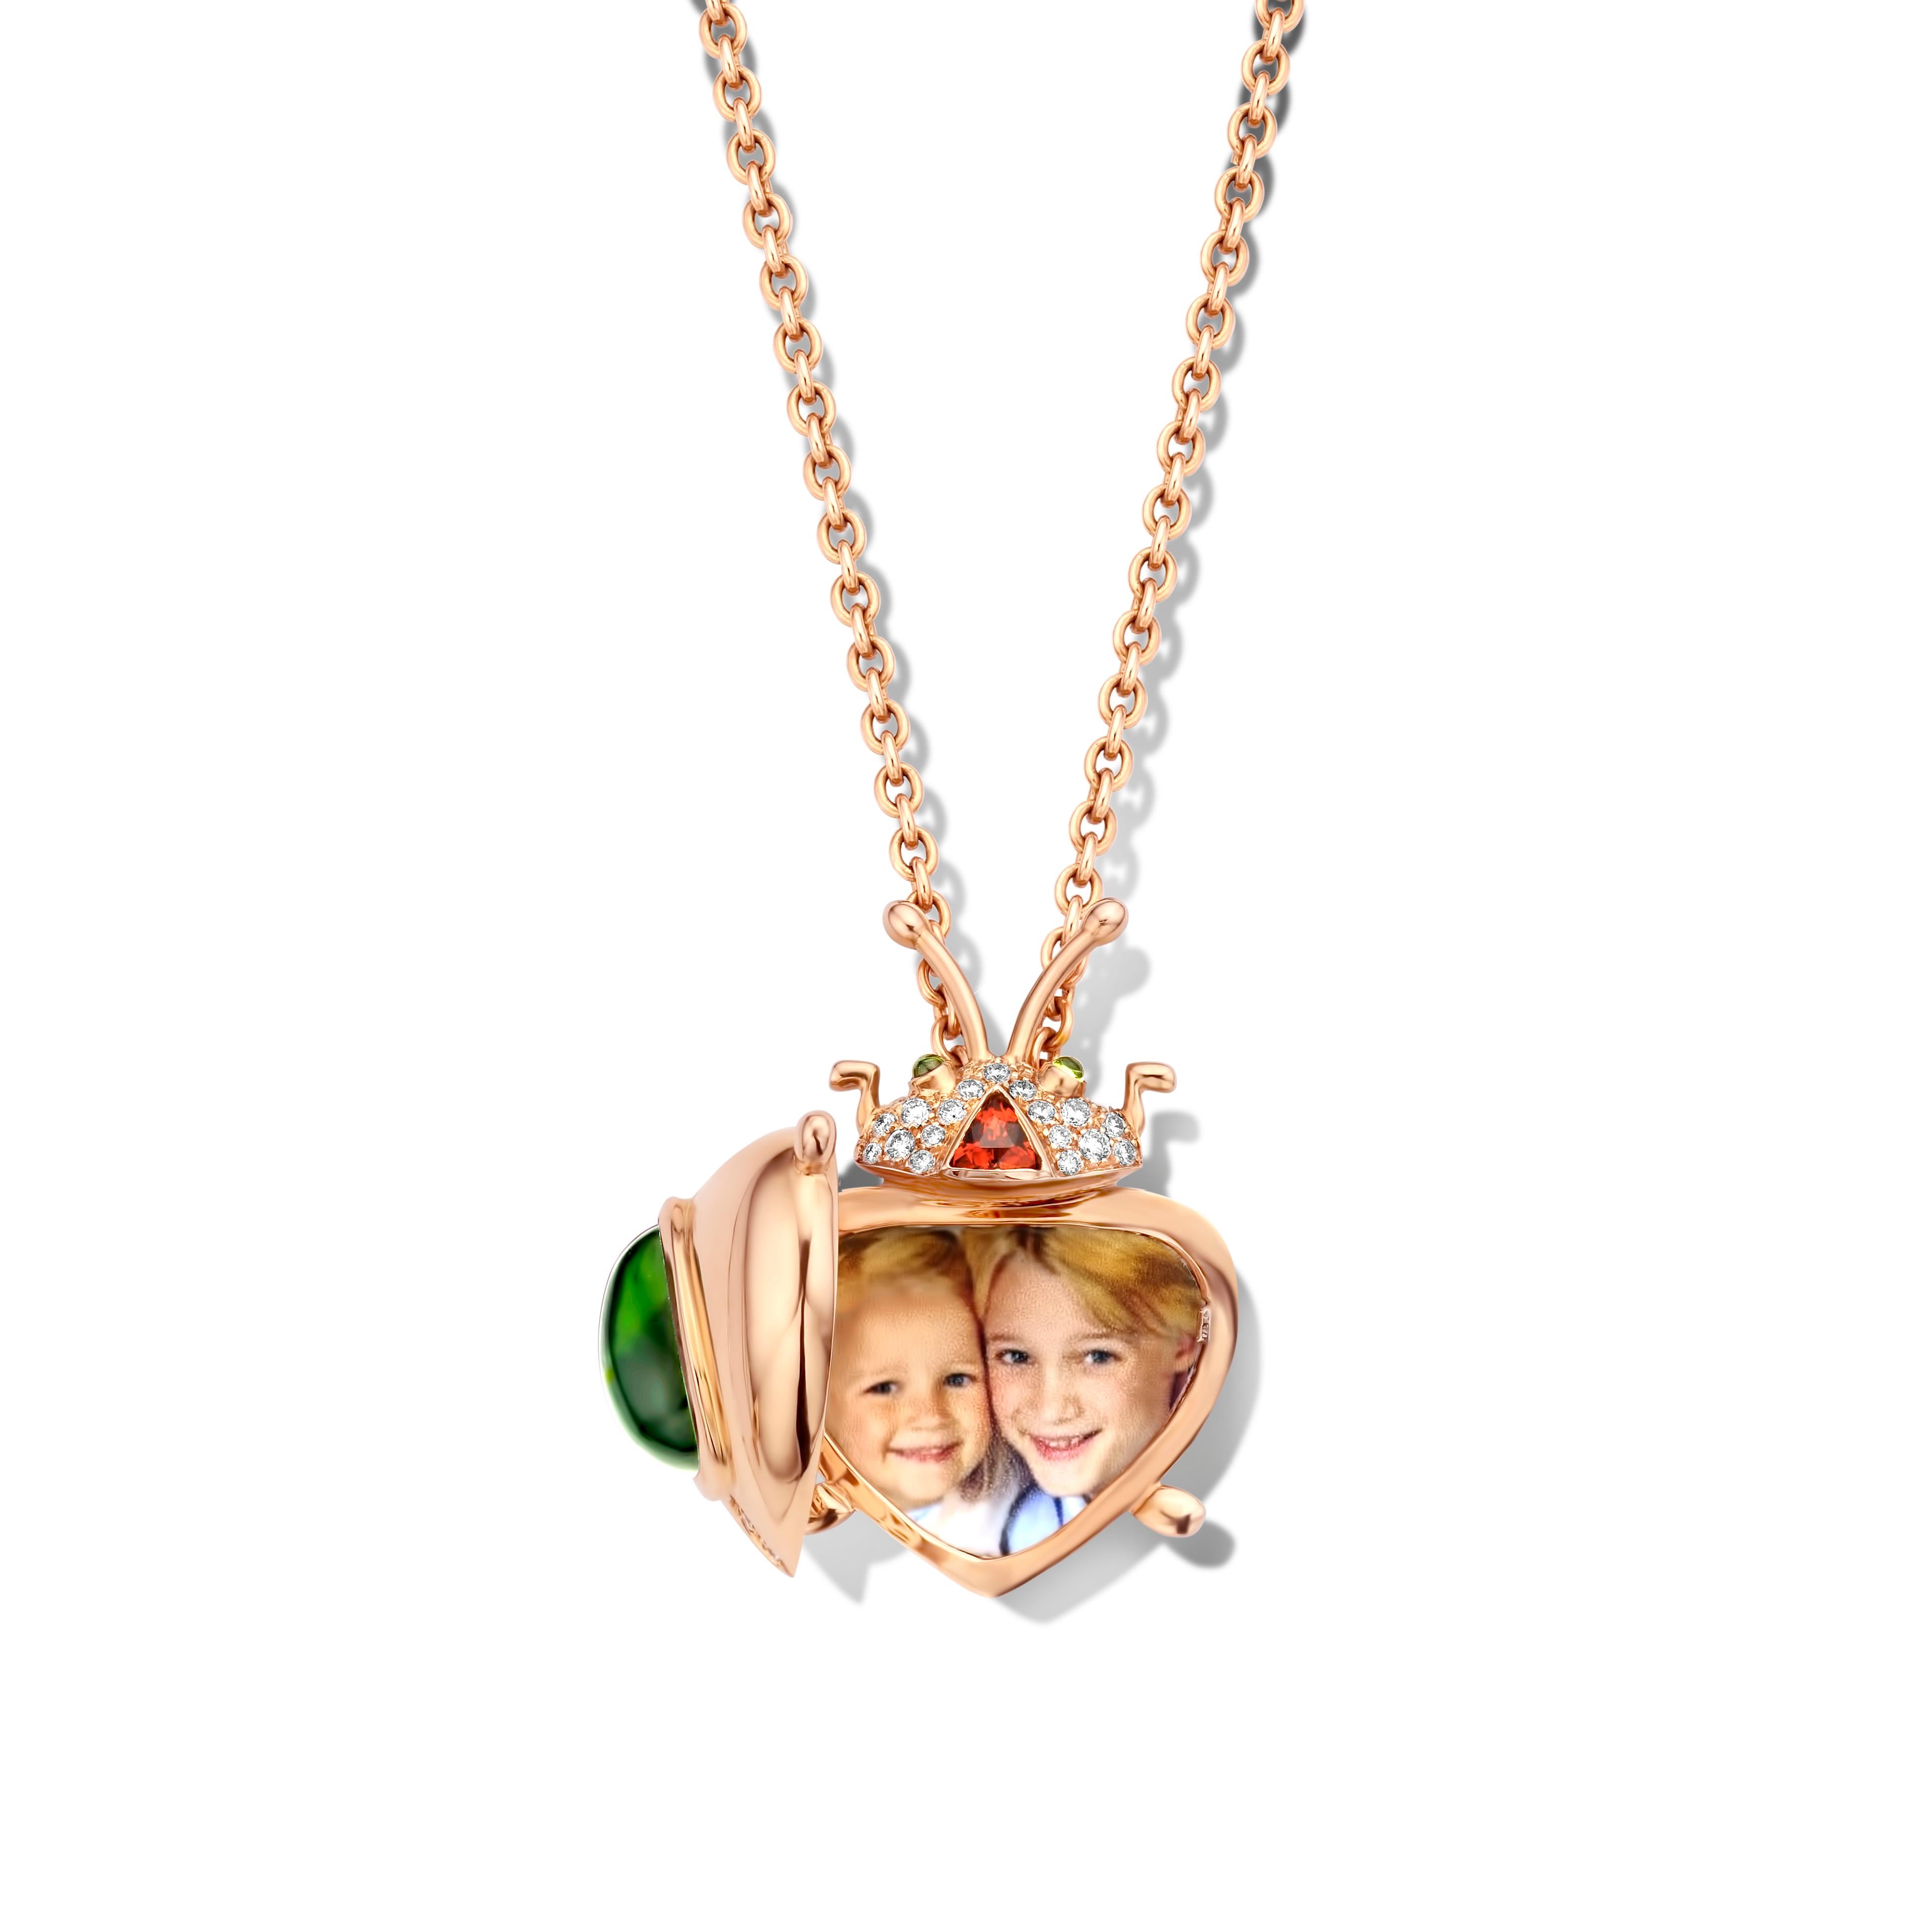 This Goldbeetle locked pendant necklace in 18K rose gold 17,6g is set with the finest diamonds in brilliant cut 0,14Ct (VVS/DEF quality) and one natural, green tourmaline in pear cabochon cut 1,97Ct. The head is set with an orange Mandarin garnet in